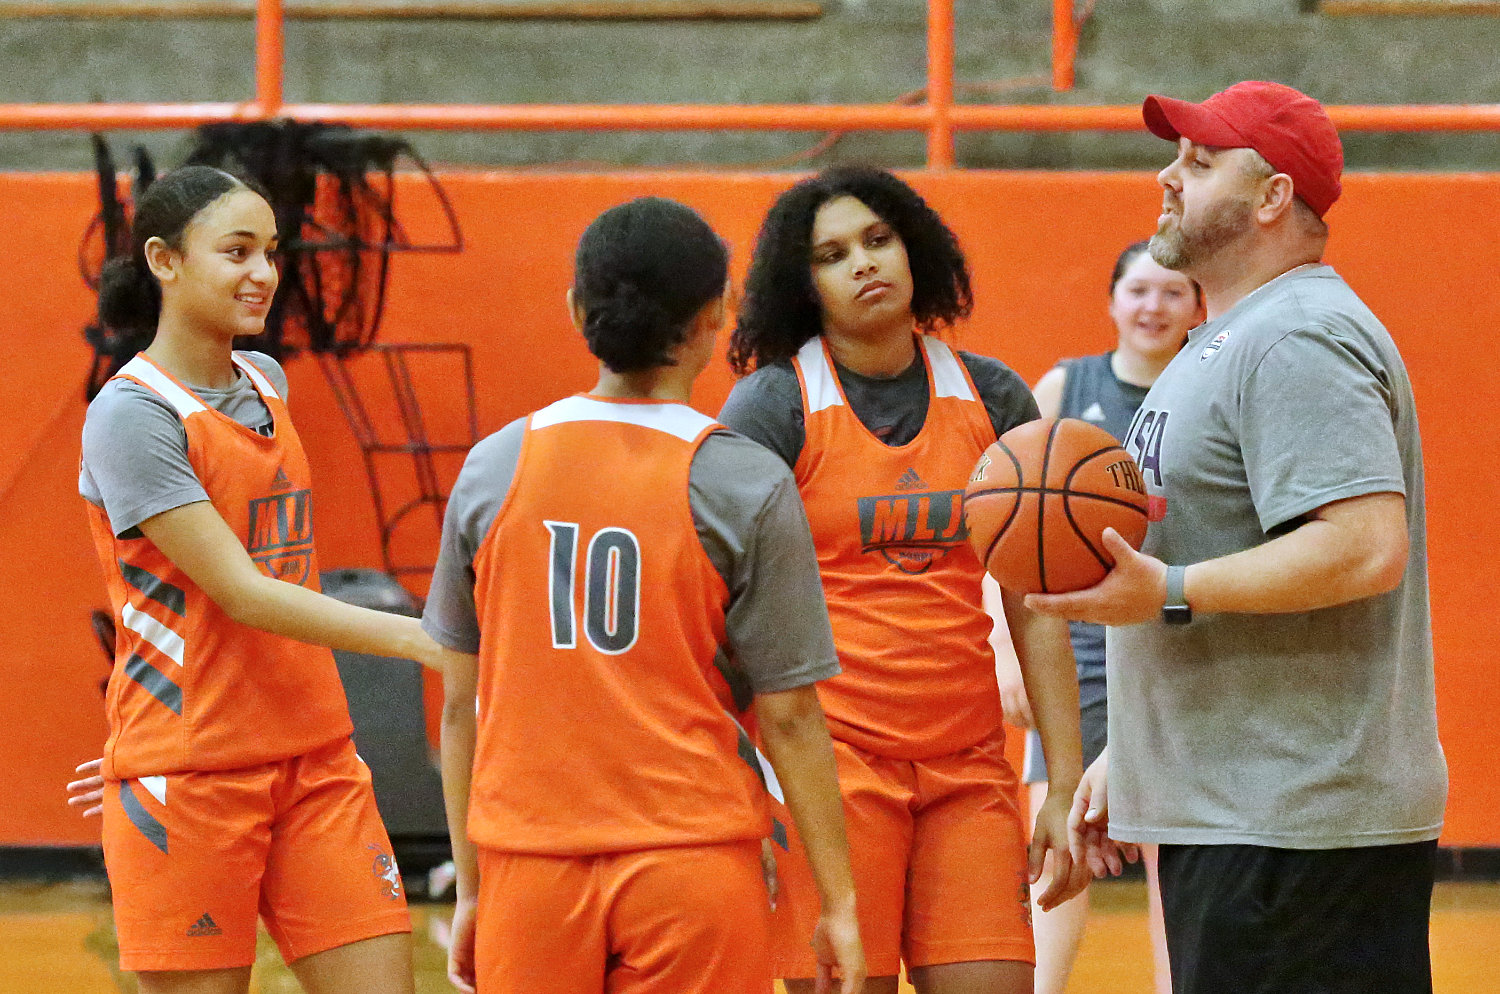 Lady Jacket head coach Alan Wilson makes a learning point at a recent practice.